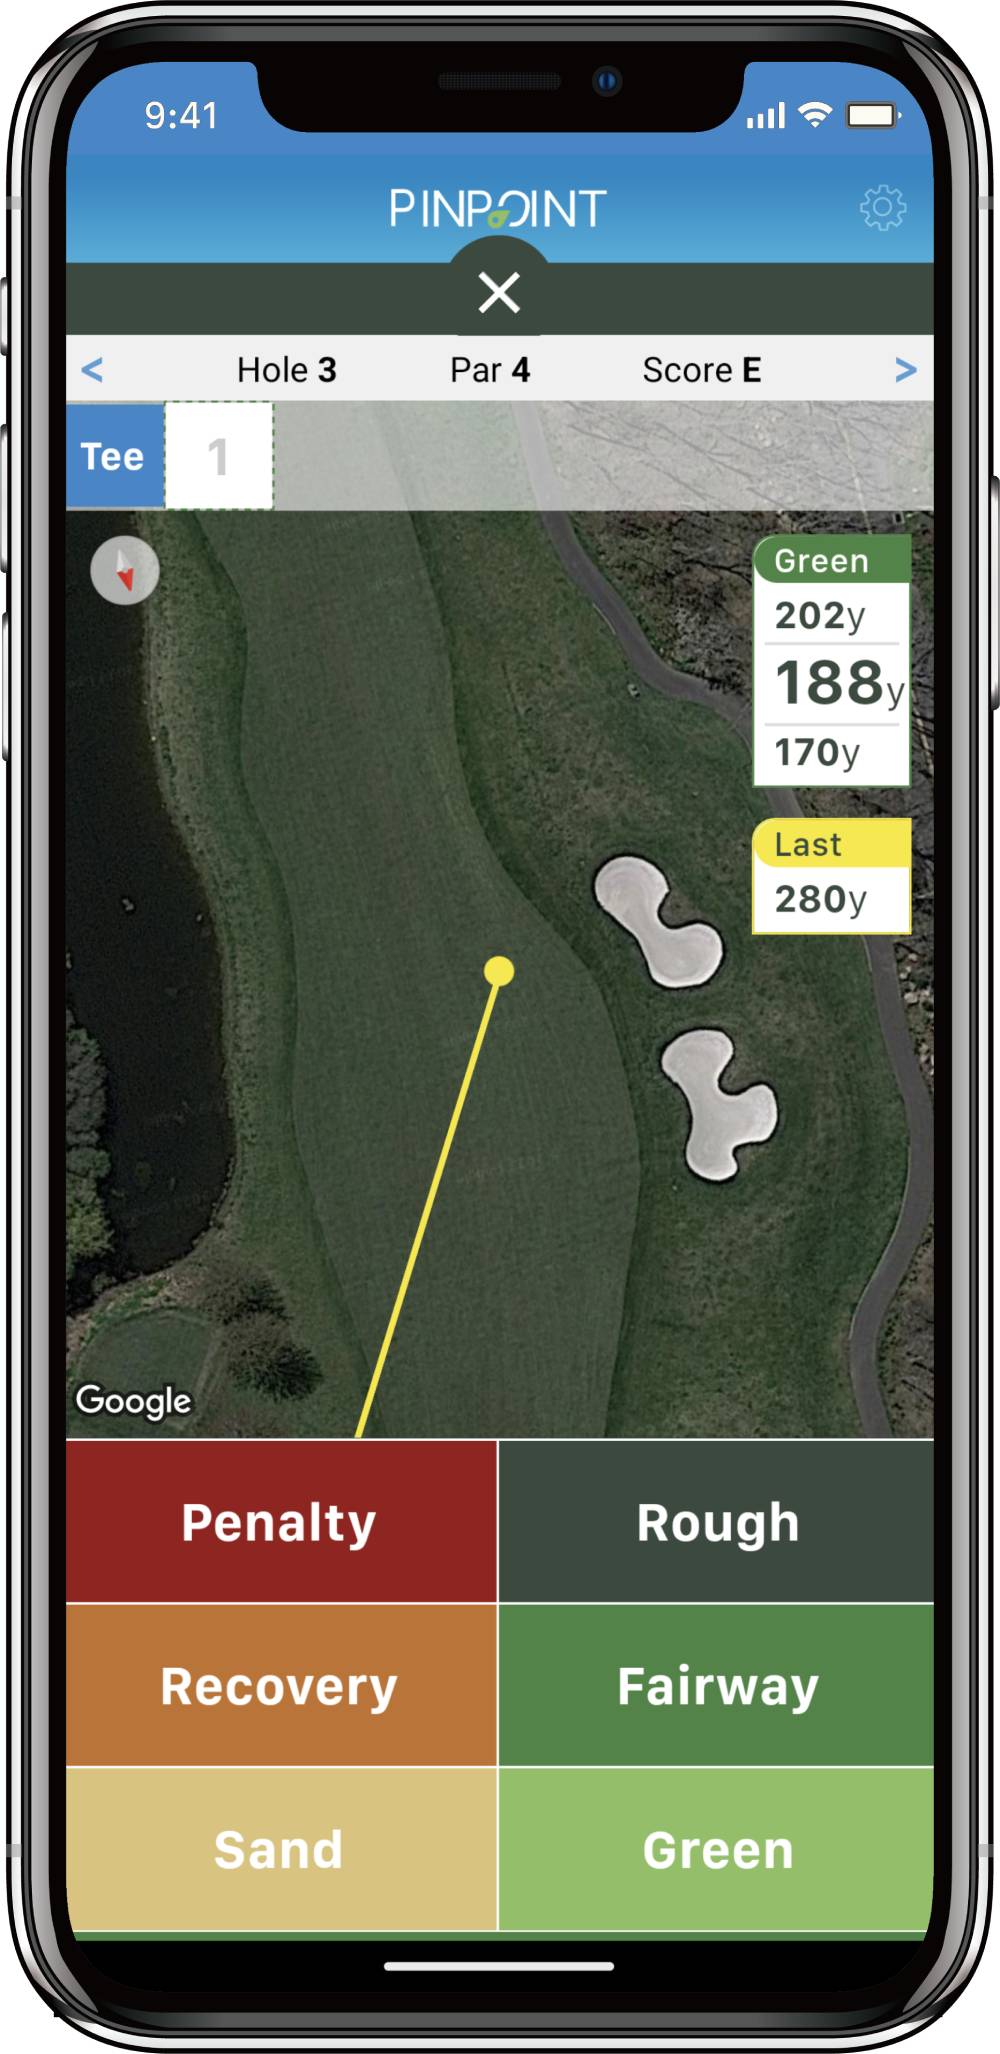 Easy strokes gained tracking with GPS